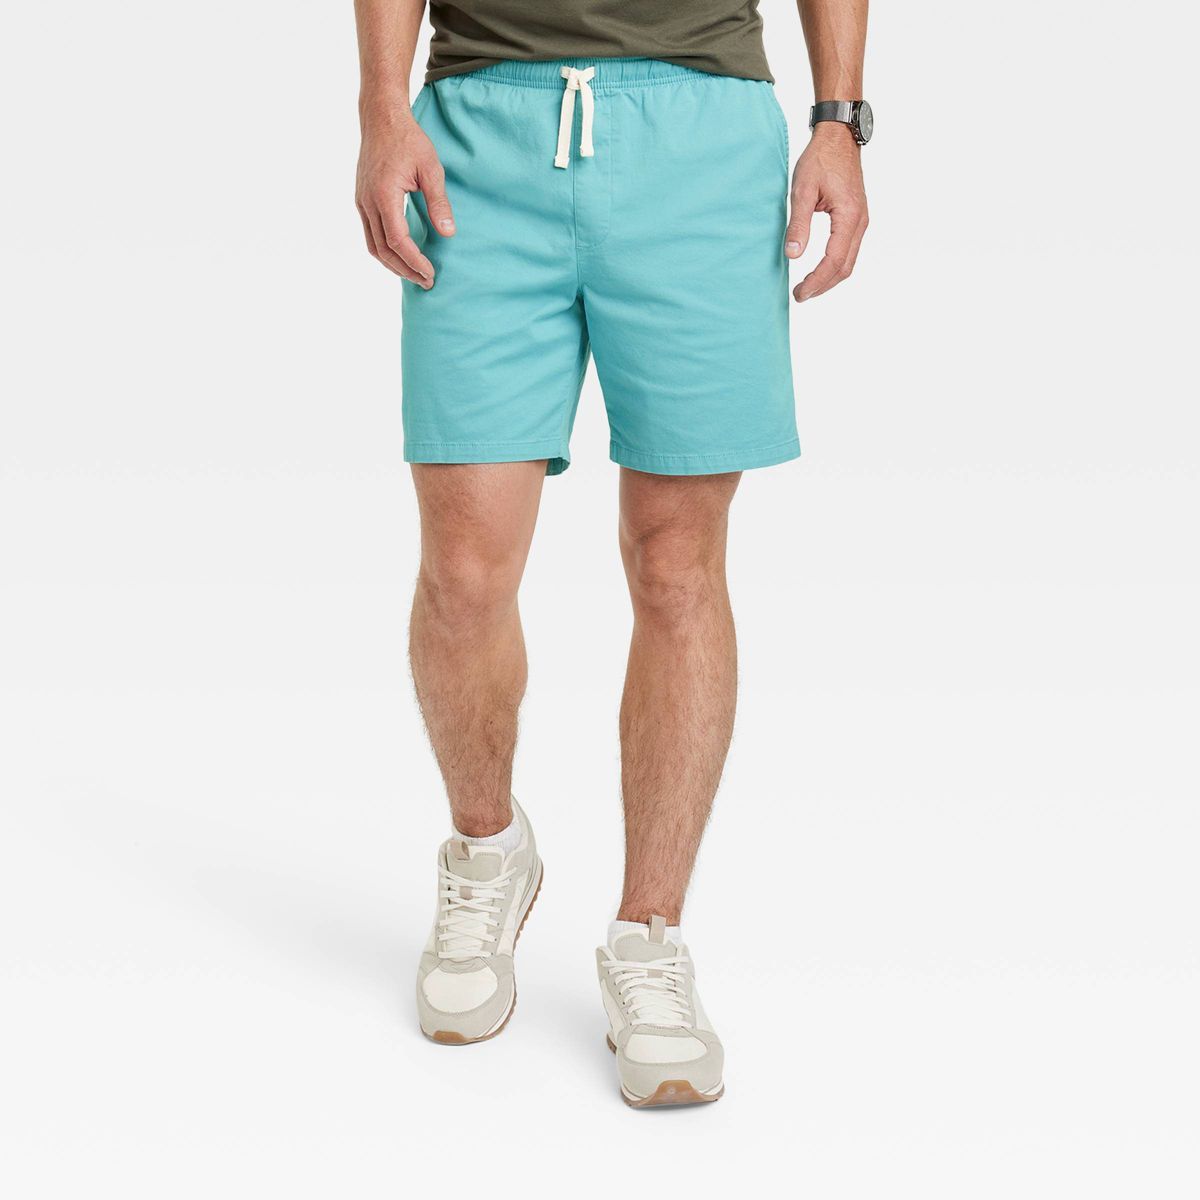 Men's 7" Everyday Pull-On Shorts - Goodfellow & Co™ Turquoise Blue M | Target